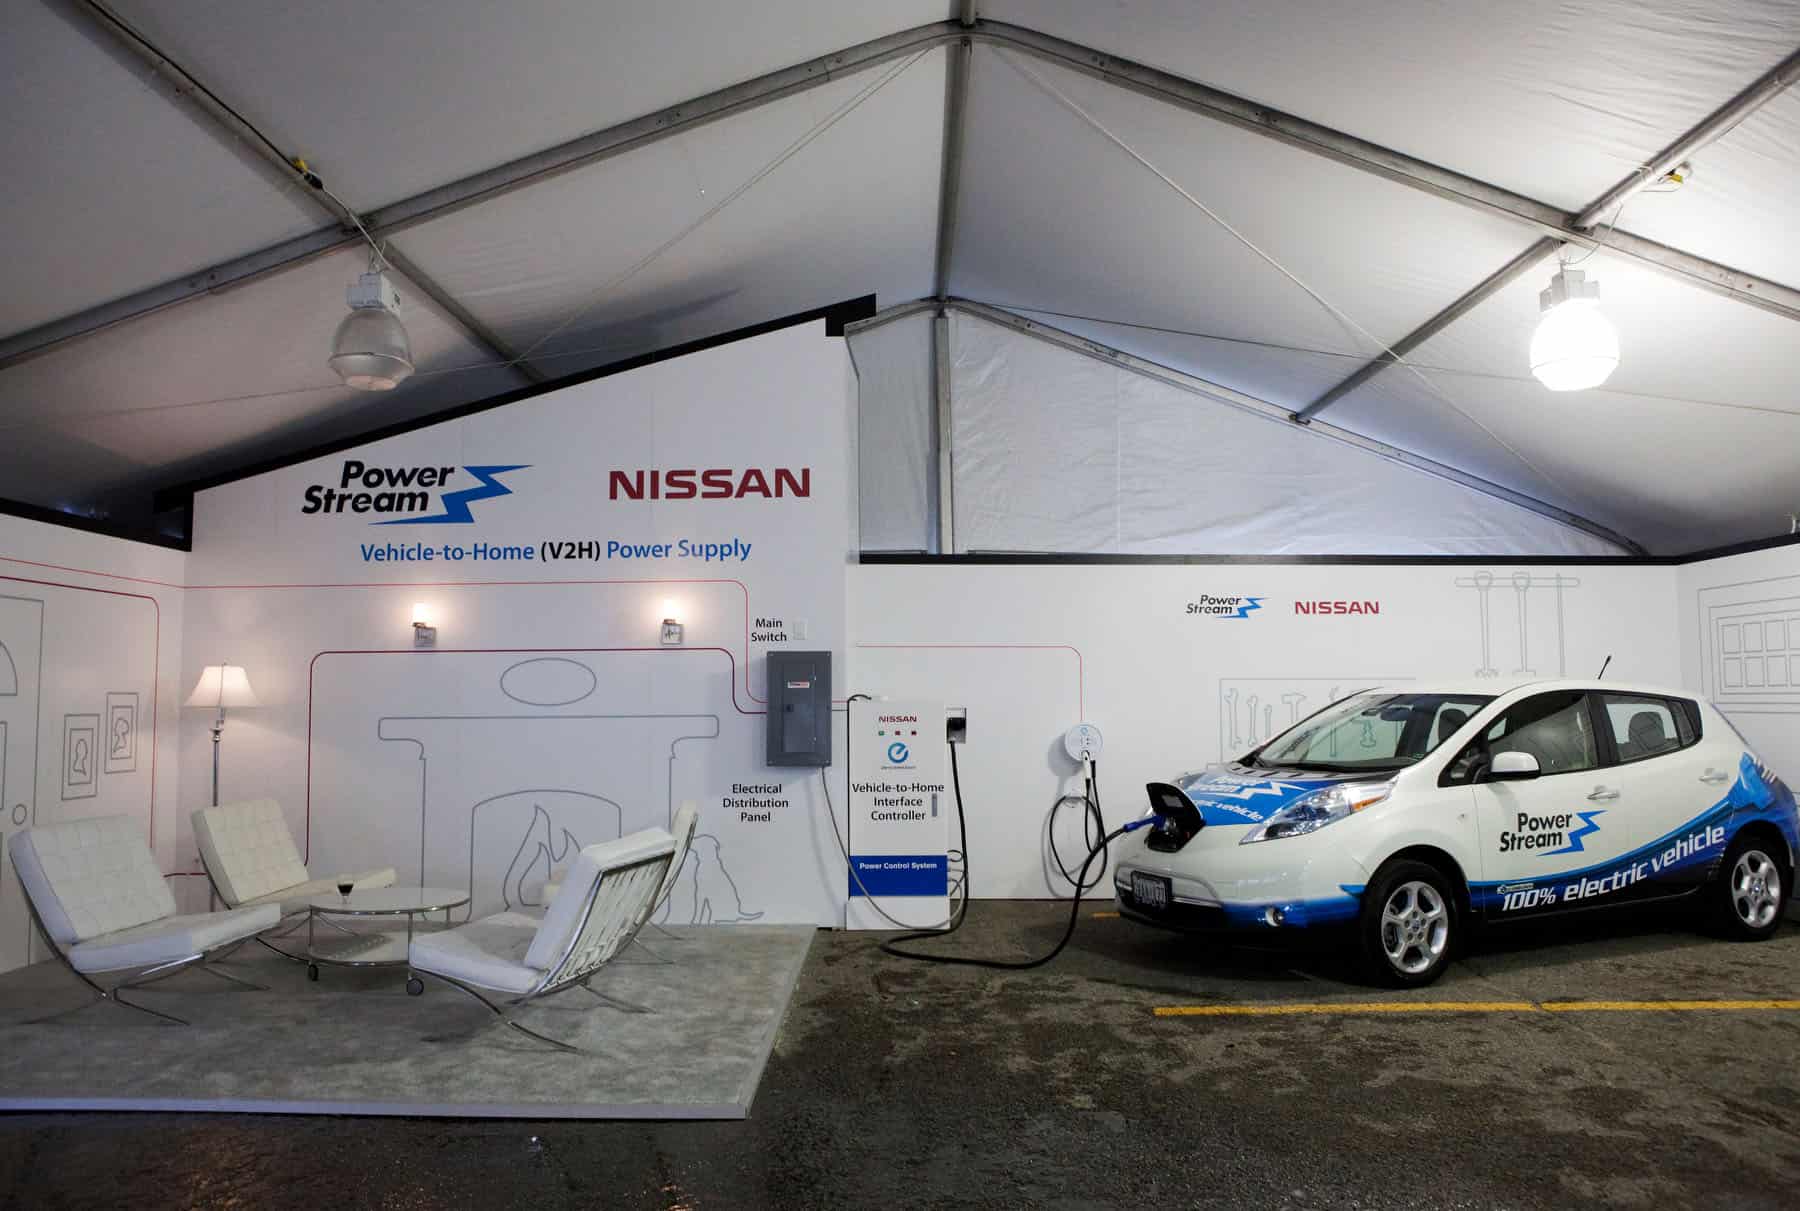 Nissan power stream leaf to home